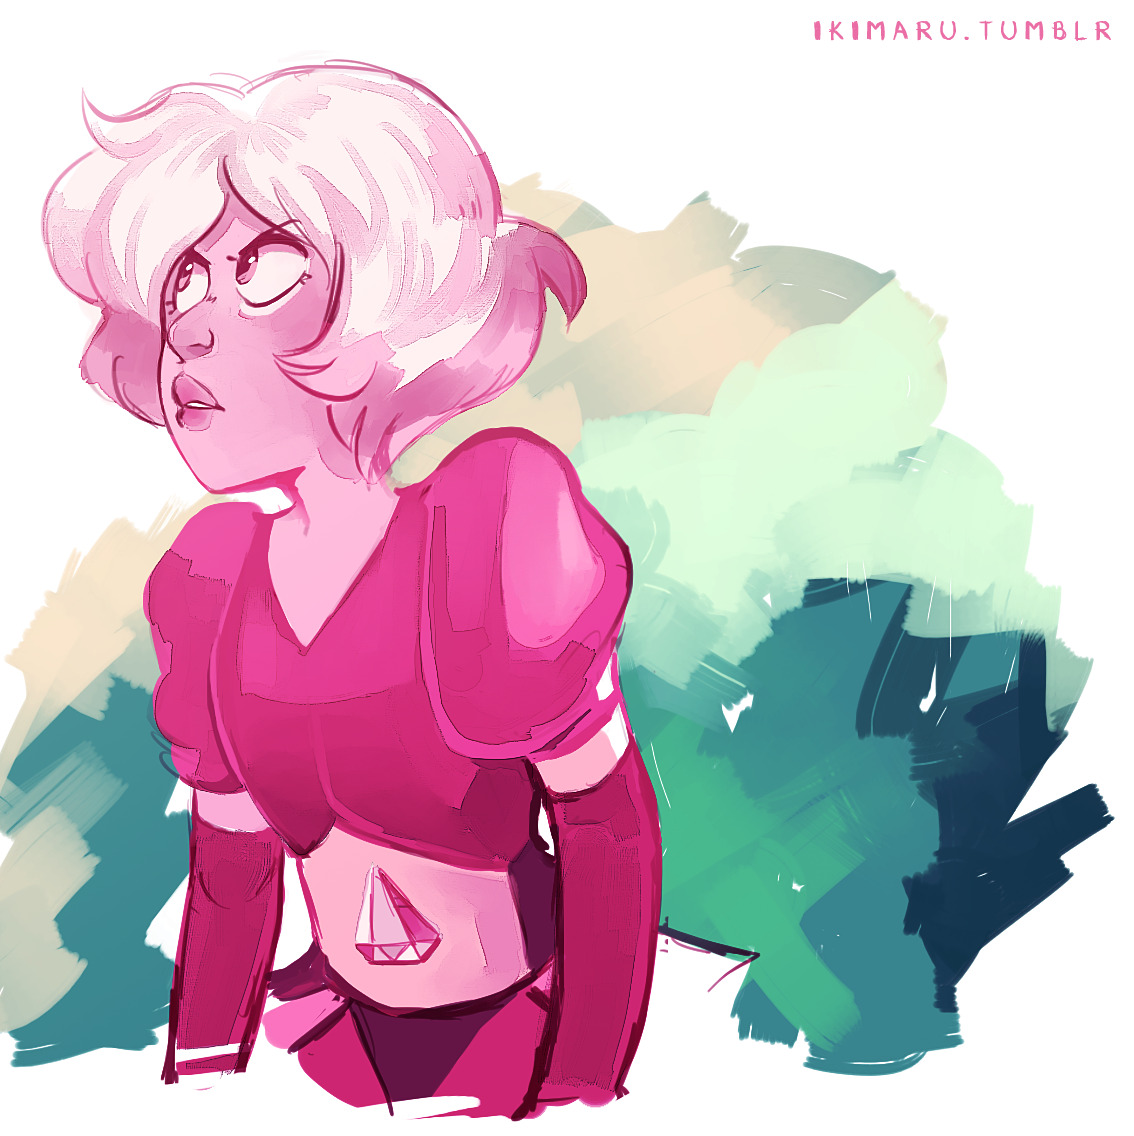 she’s pink and angry